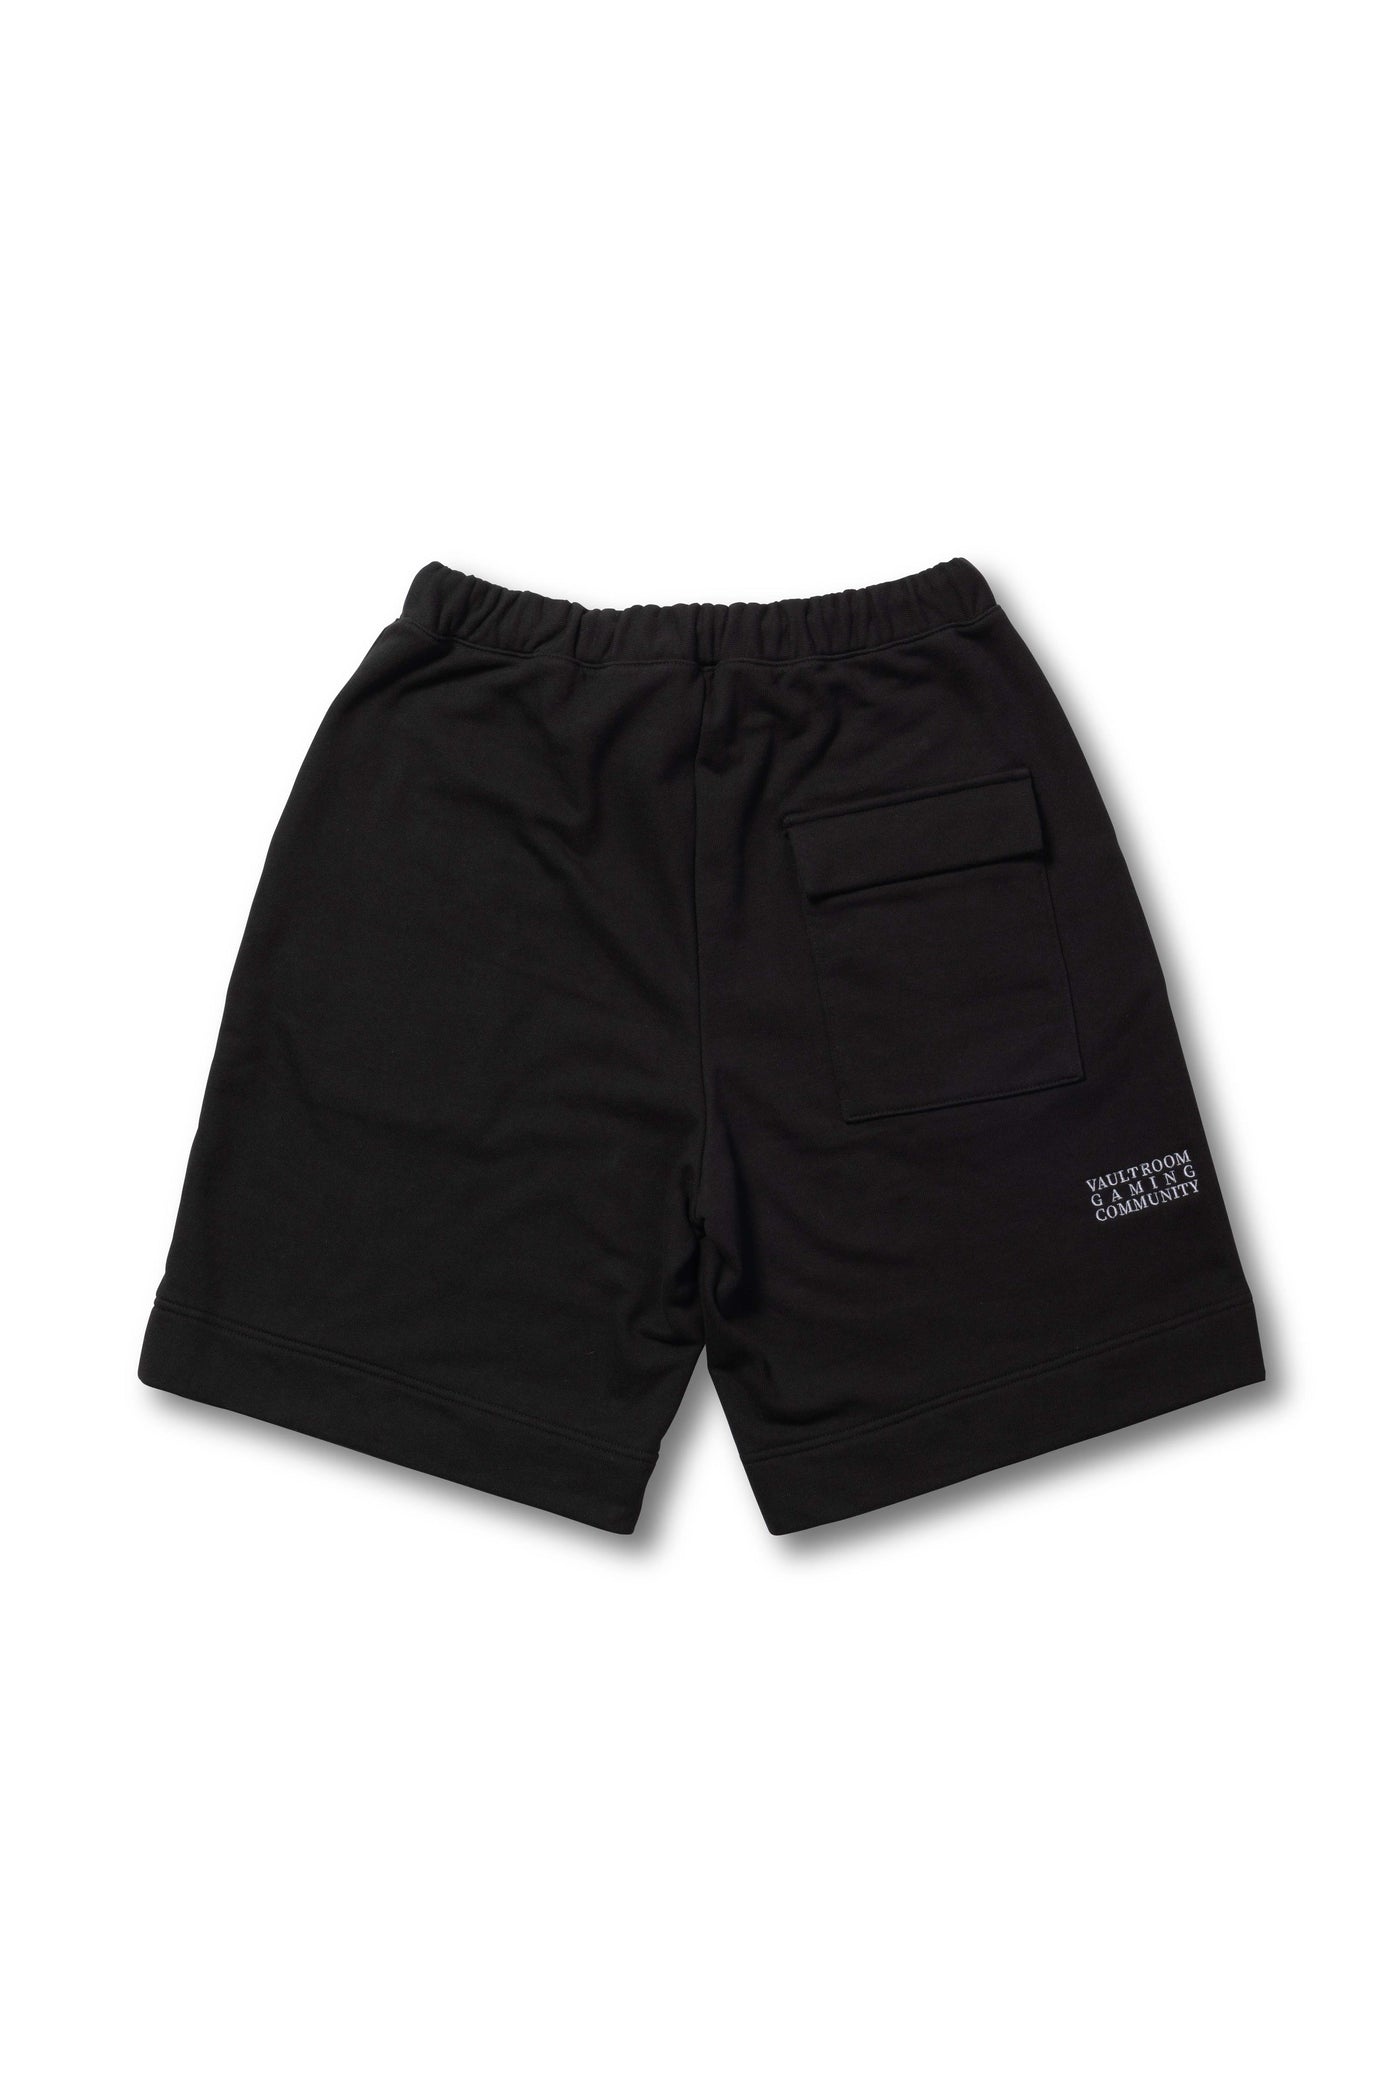 VGC FRENCH TERRY SHORTS / BLACK – VAULTROOM